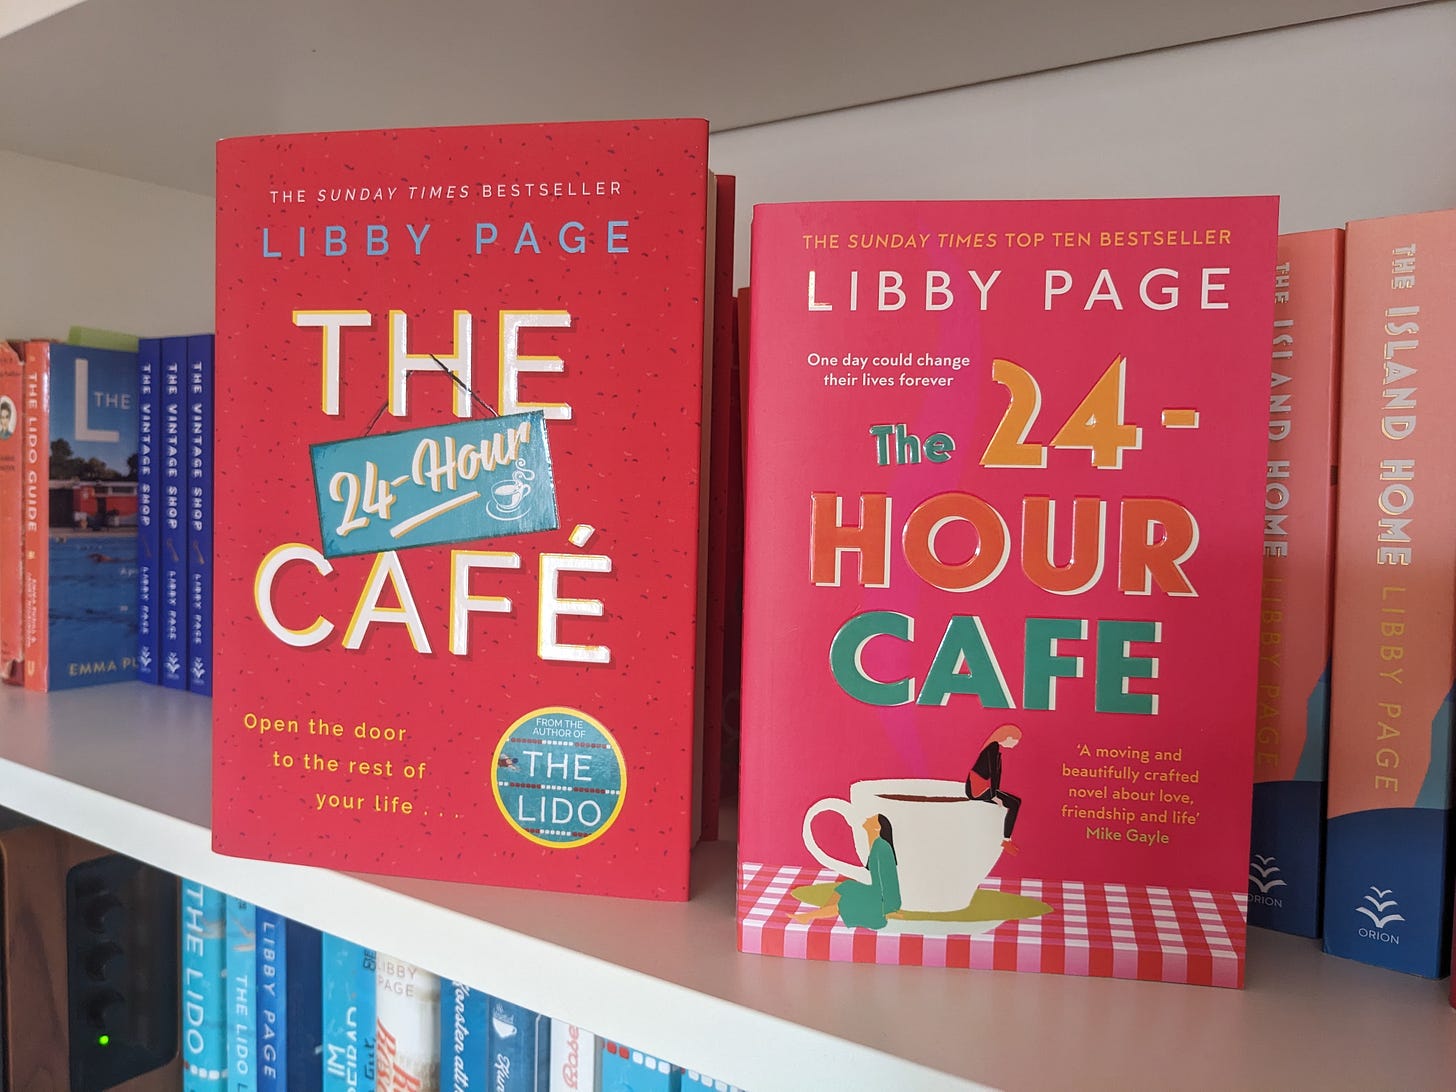 The hardback of The 24-Hour Cafe by Libby Page next to the paperback, on a bookshelf. The hardback is dark red and text based. The paperback is a deep pink and features an image of two women sitting near a teacup on a table with a red and white check tablecloth.